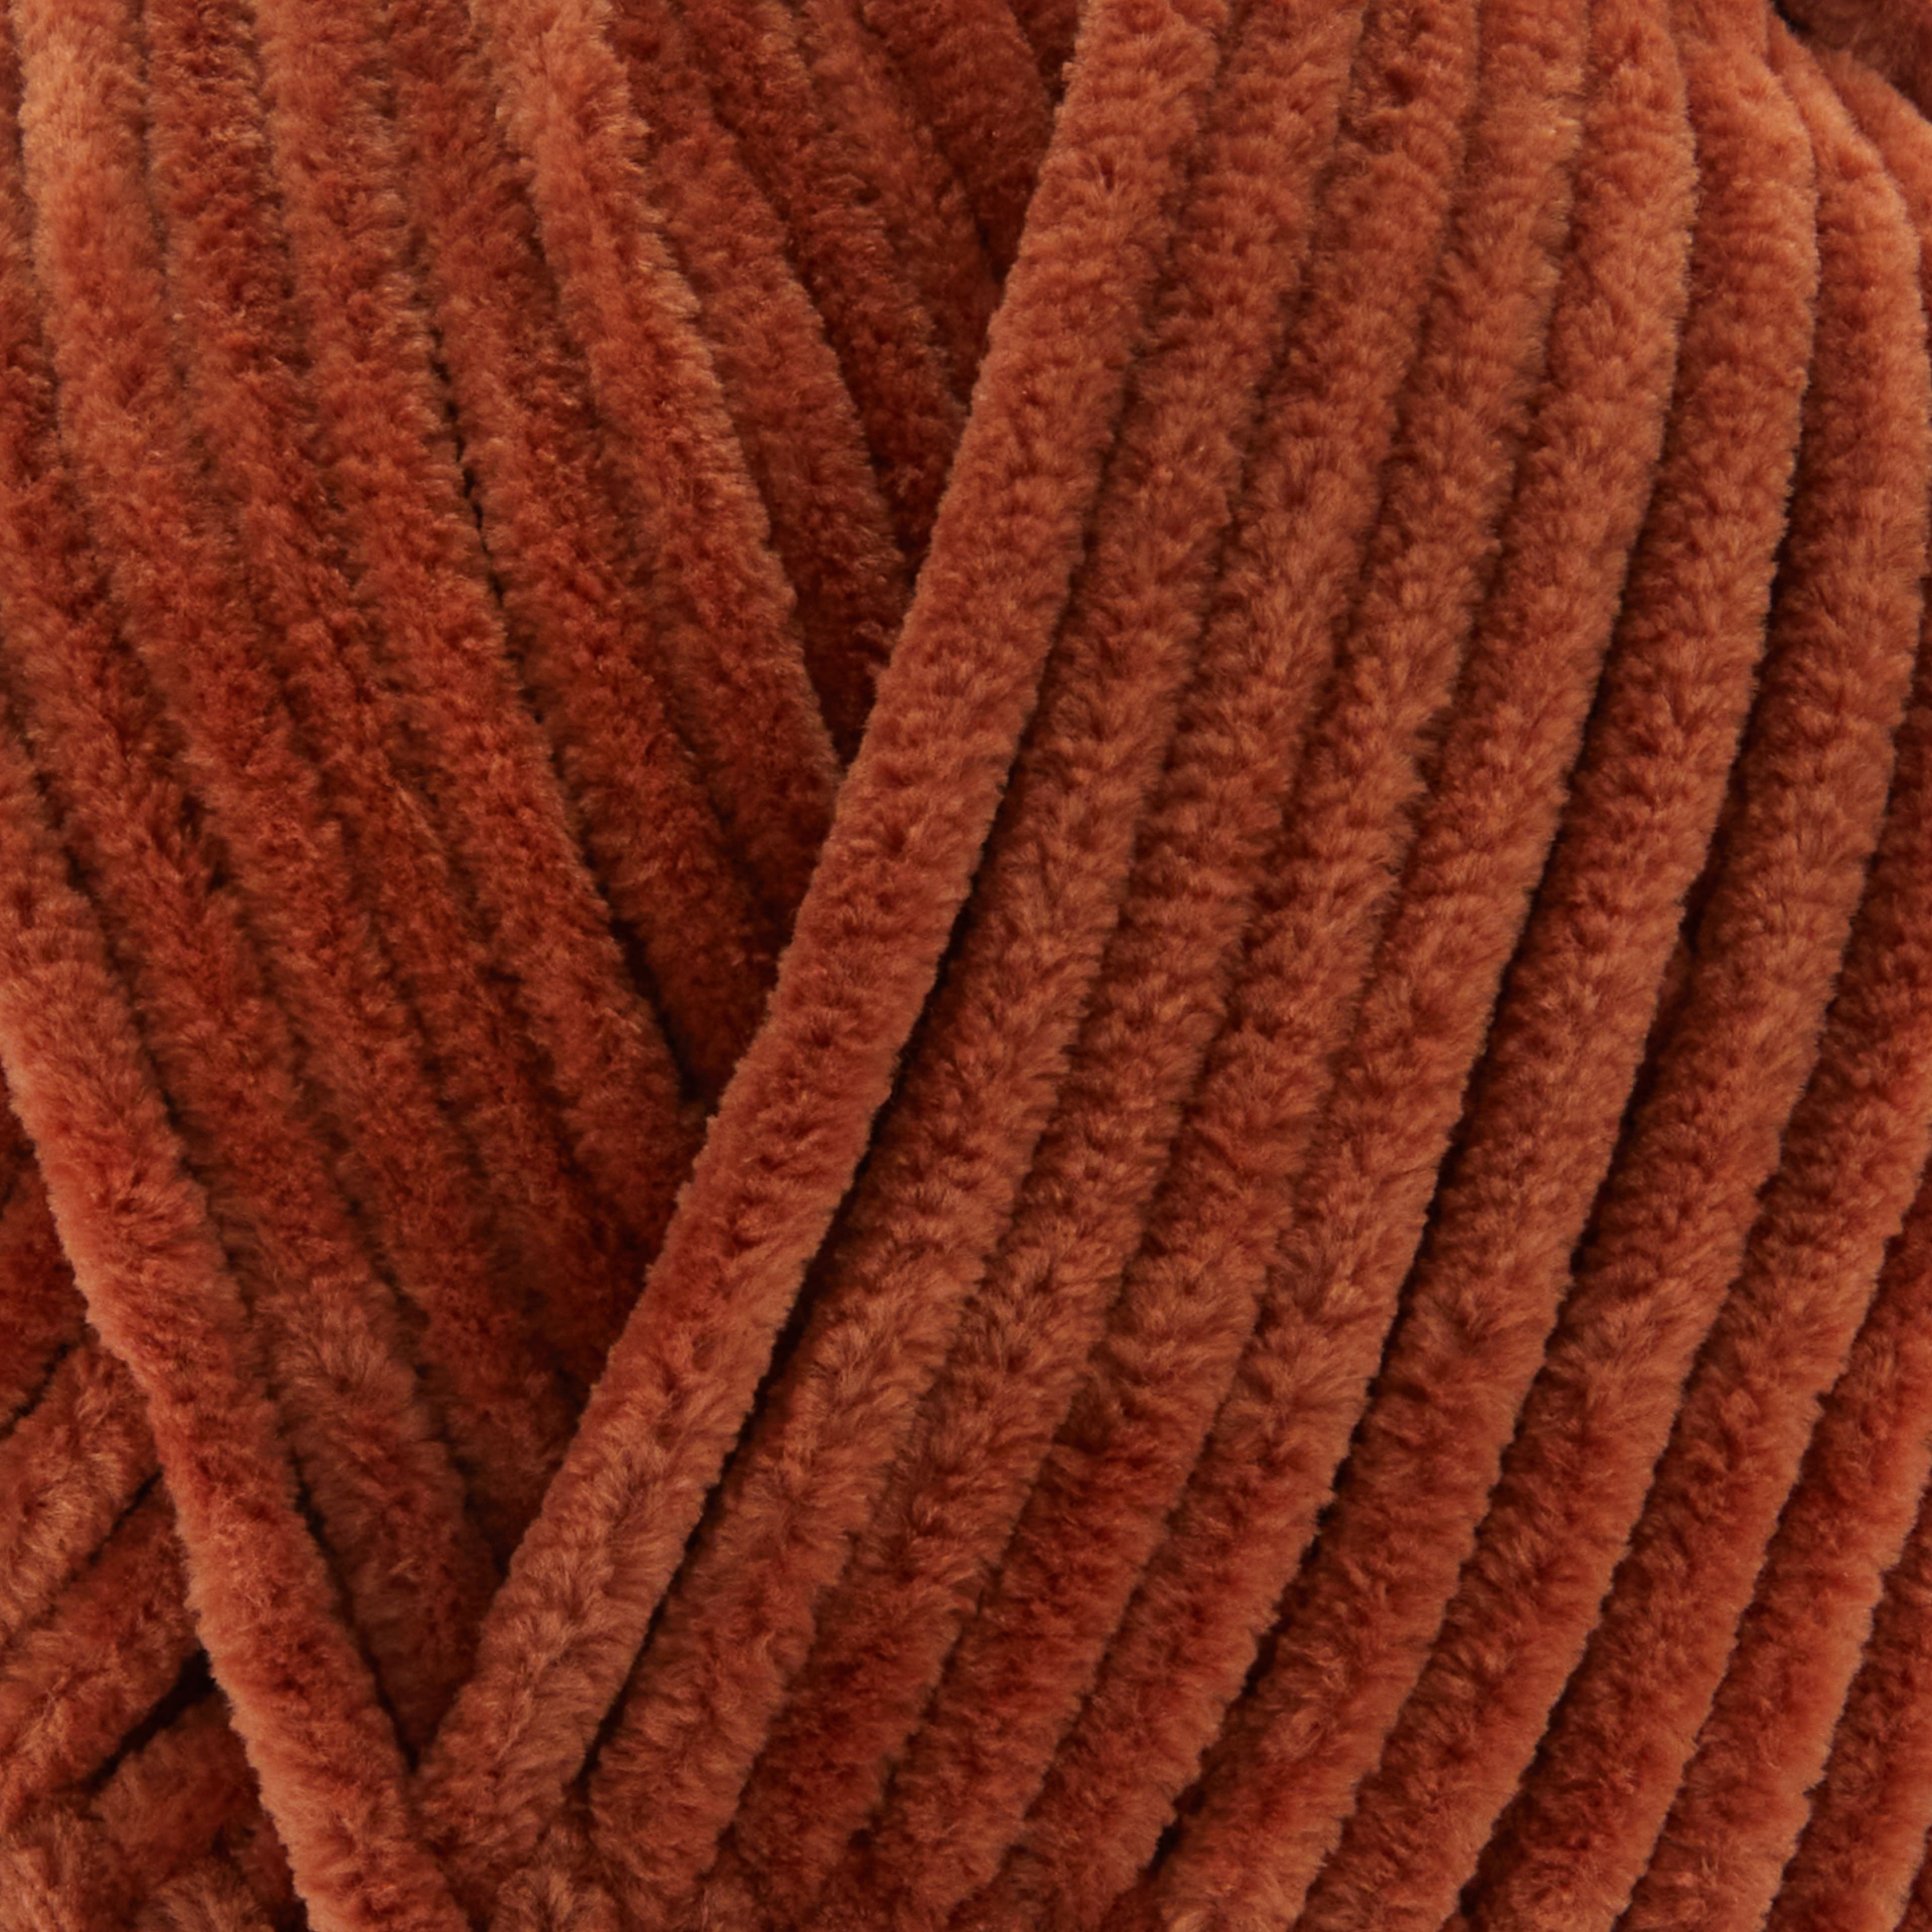 Chenille Home Slim™ Solid Yarn by Loops & Threads®, Michaels